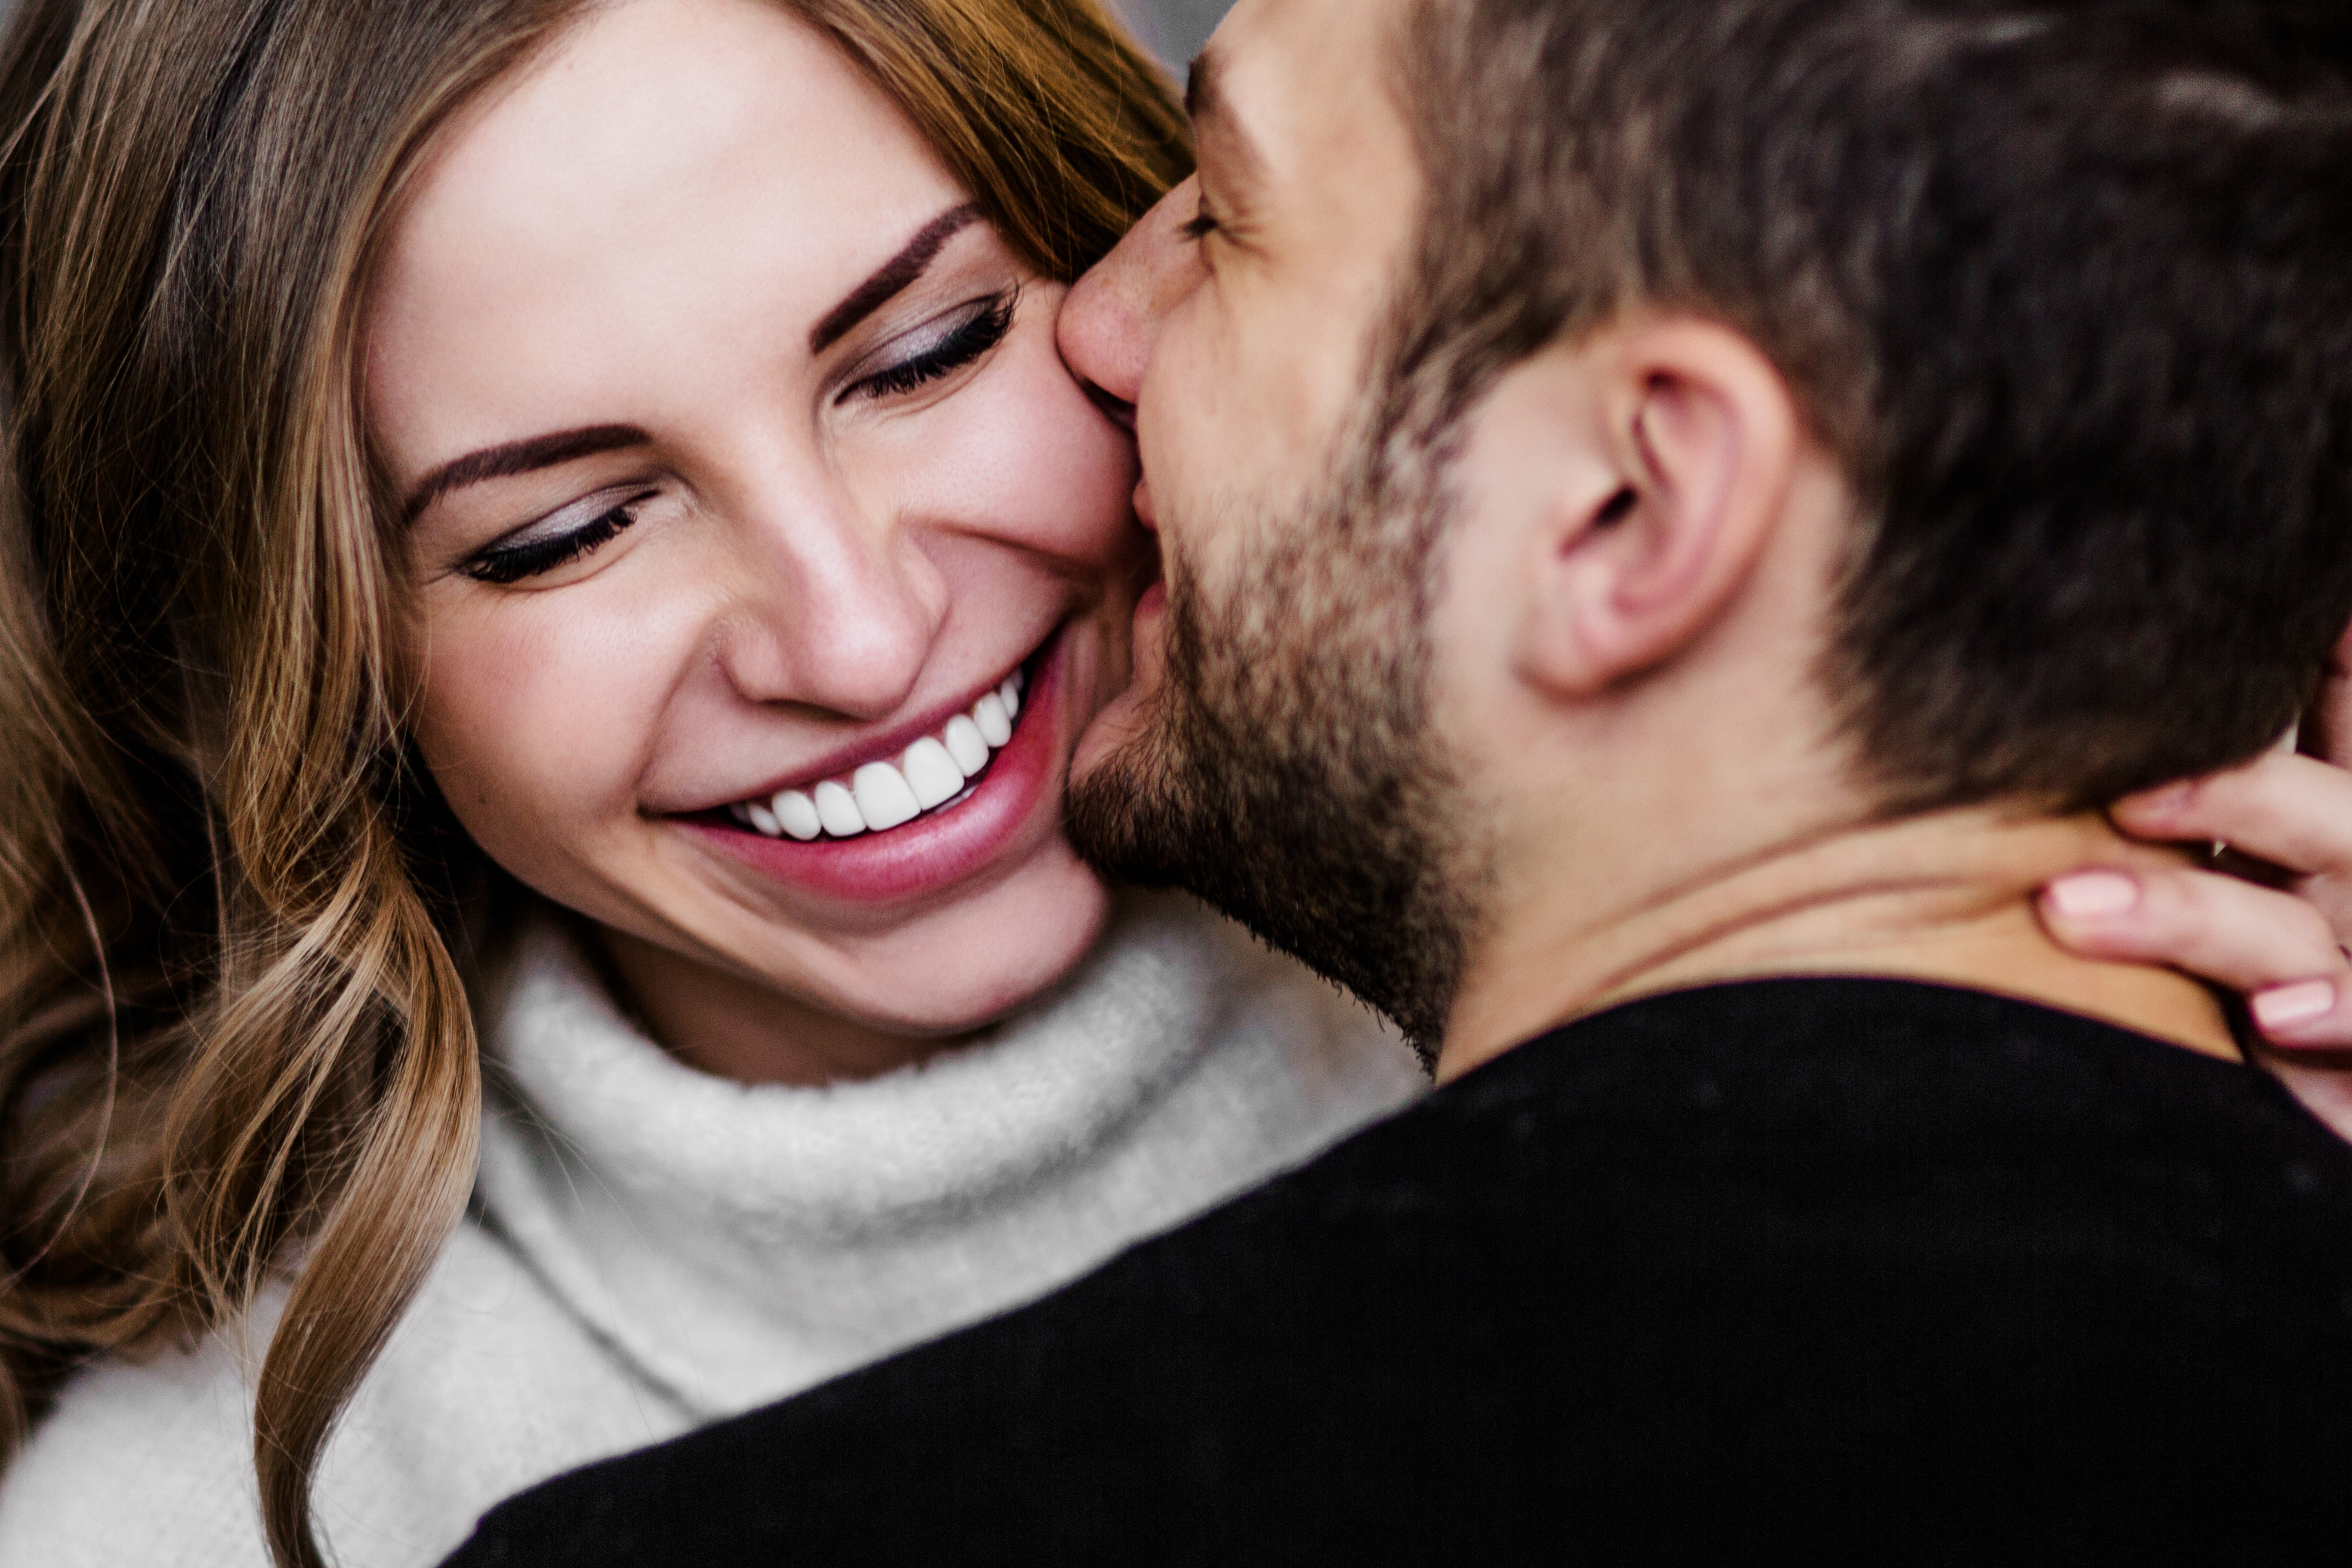 A man kissing a woman on the cheek as she smiles | Source: Shutterstock